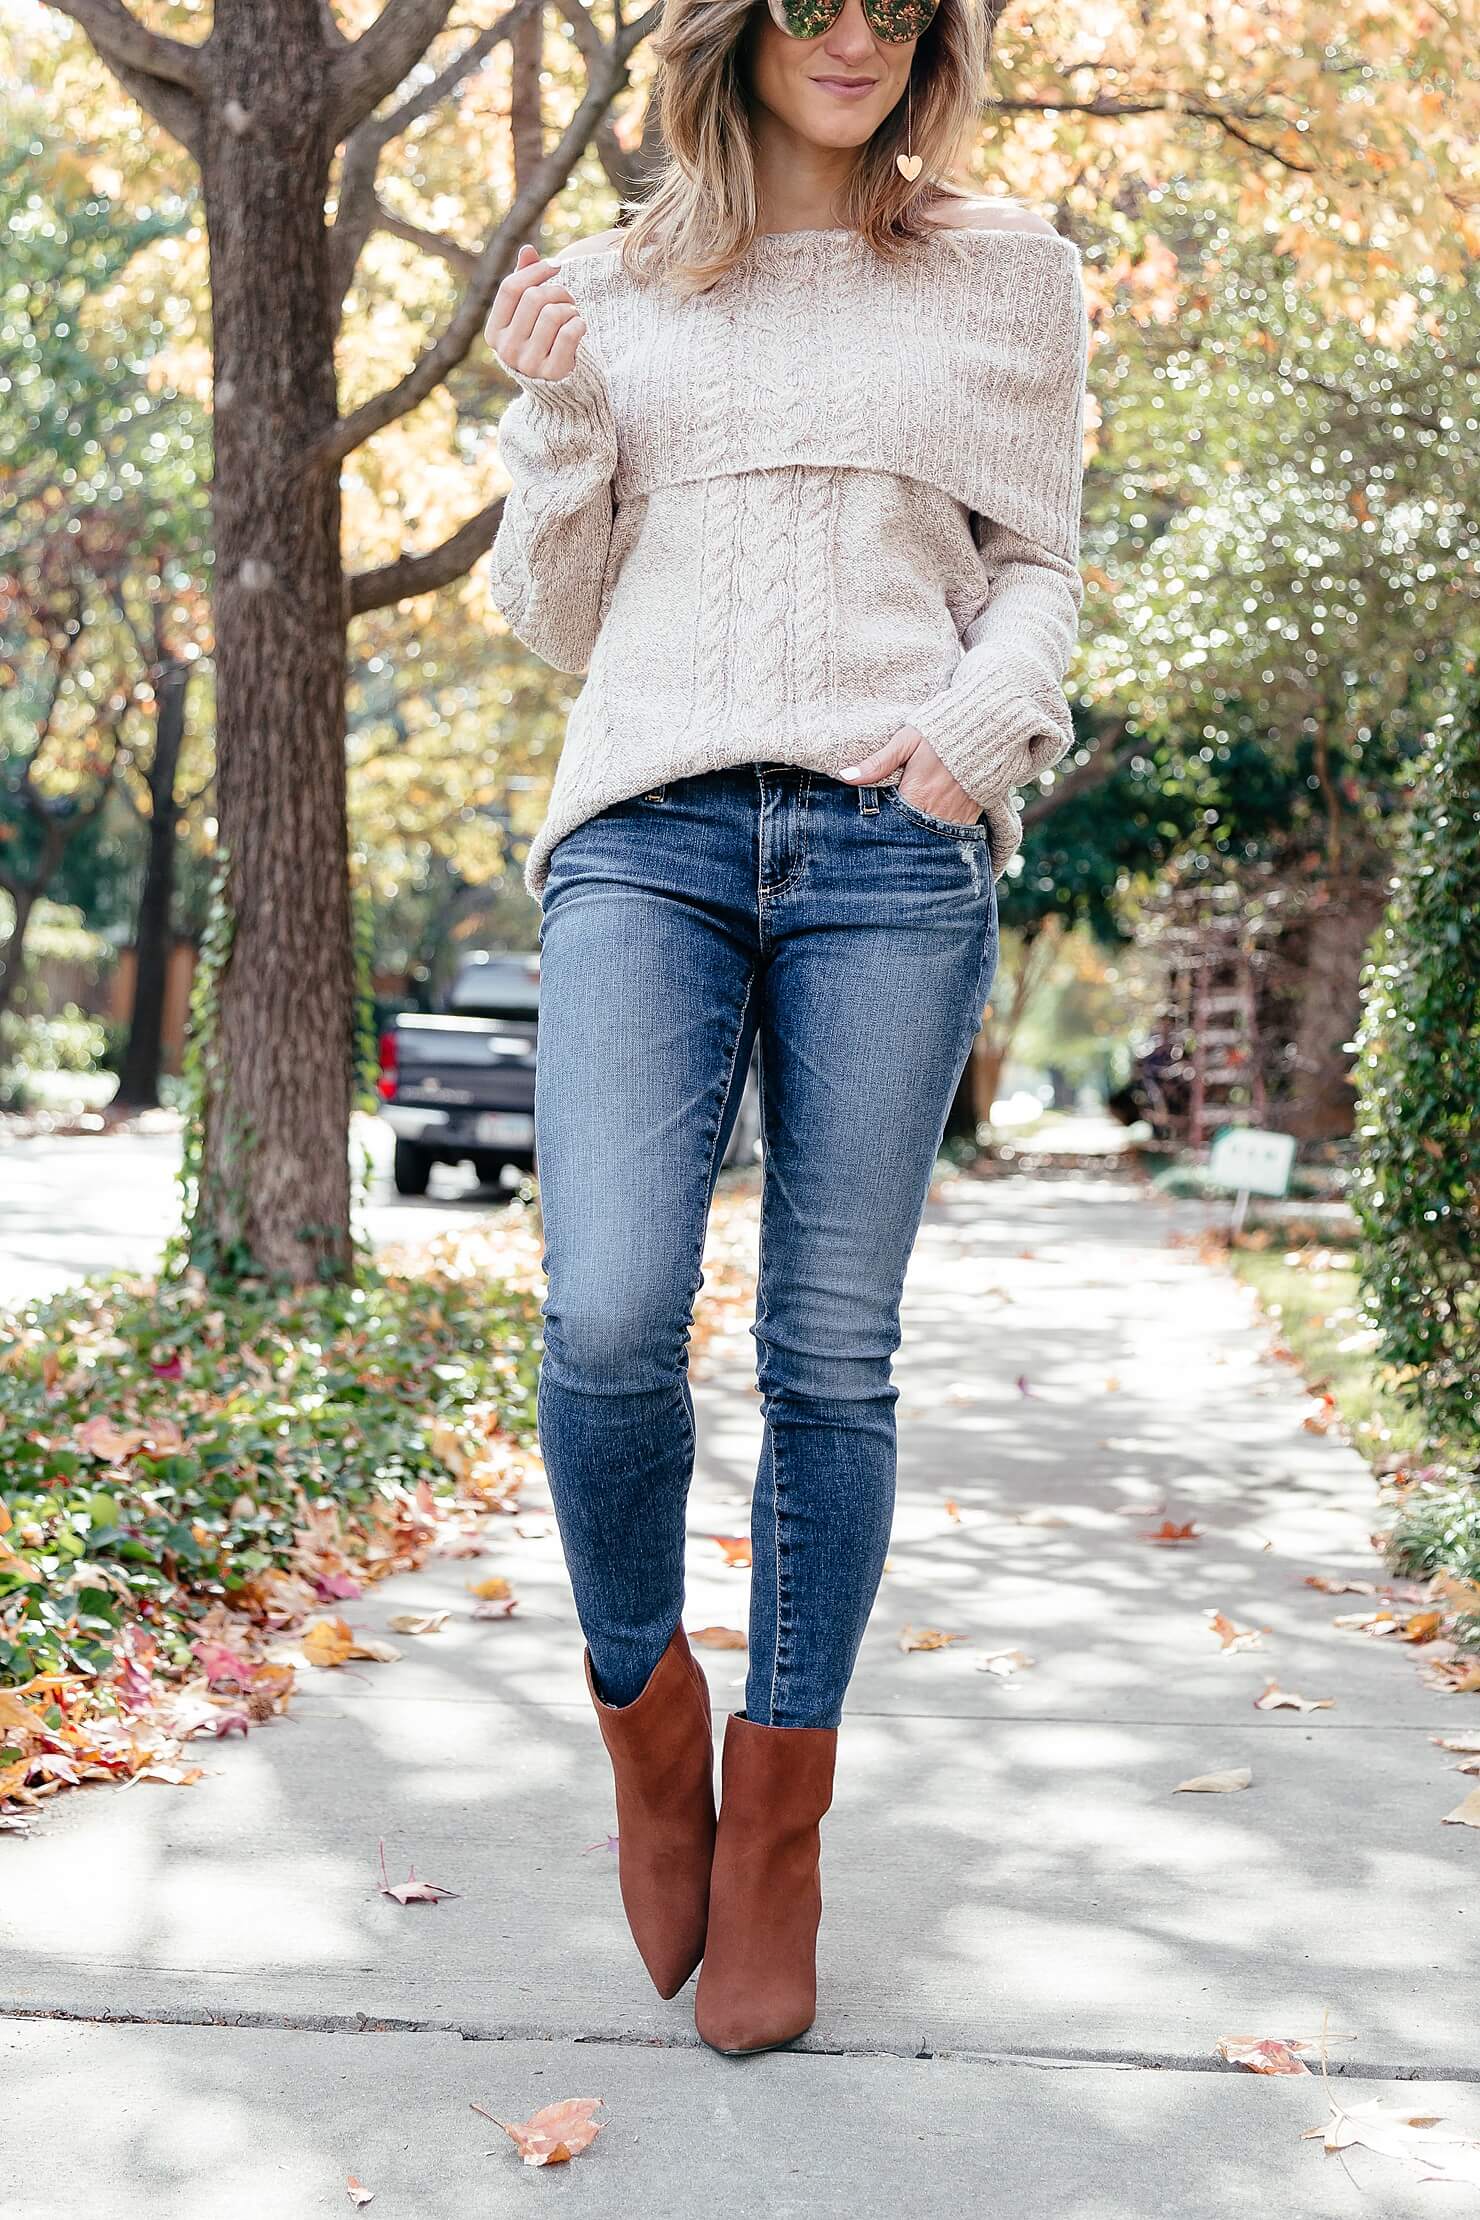 off the shoulder cable knit sweater, ag jeans, and brown heel booties